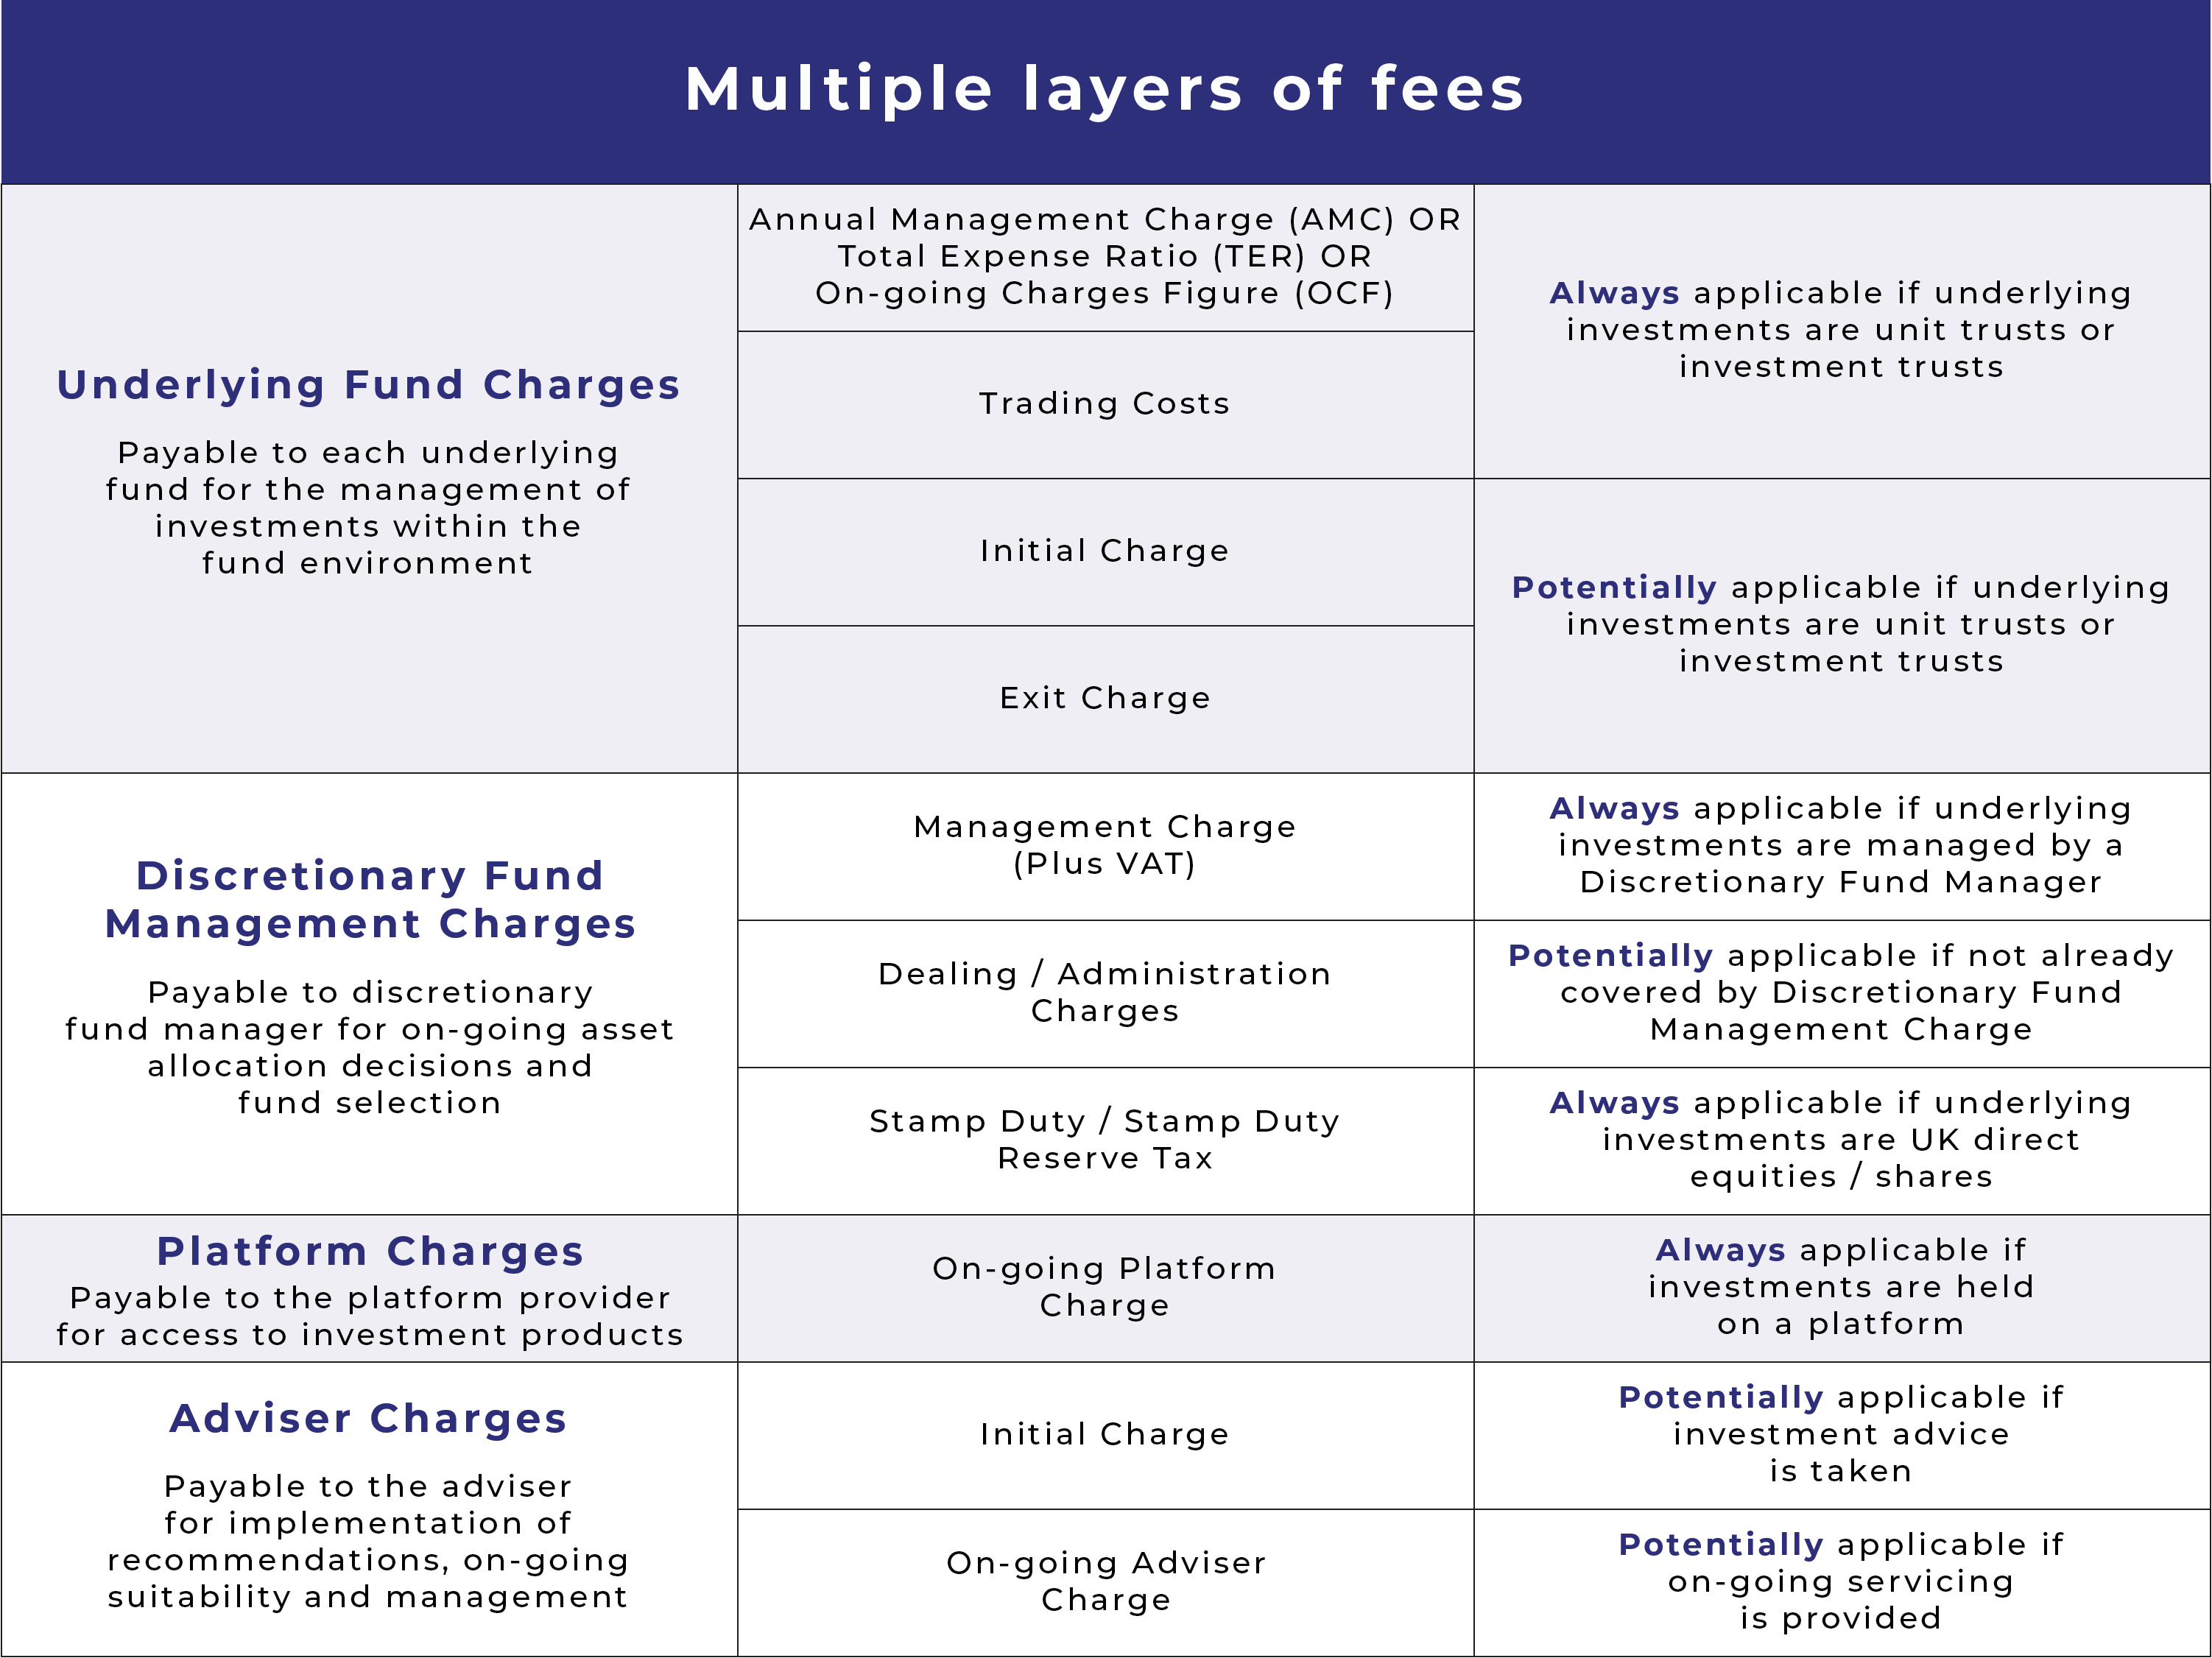 Multiple layers of fees reduce investment and savings benefits for consumers